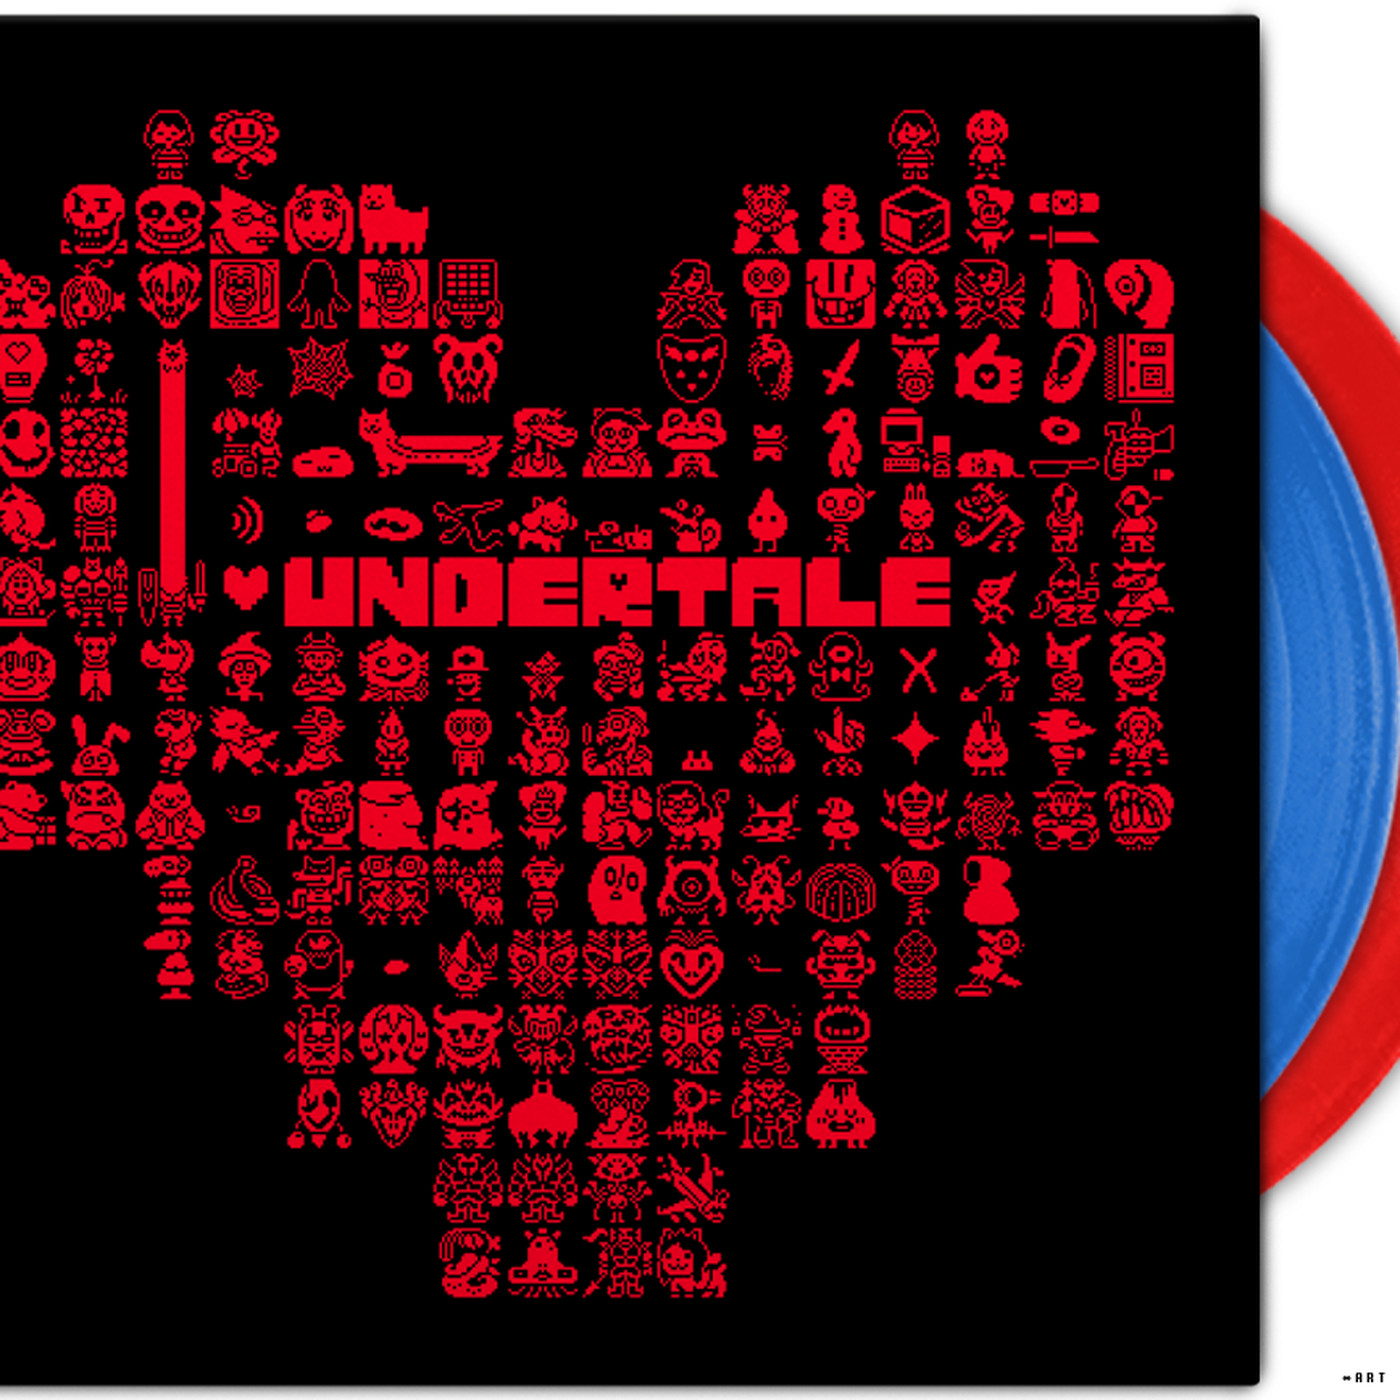 Undertale Vinyl Adds Chiptune Goodness To Your Record Collection